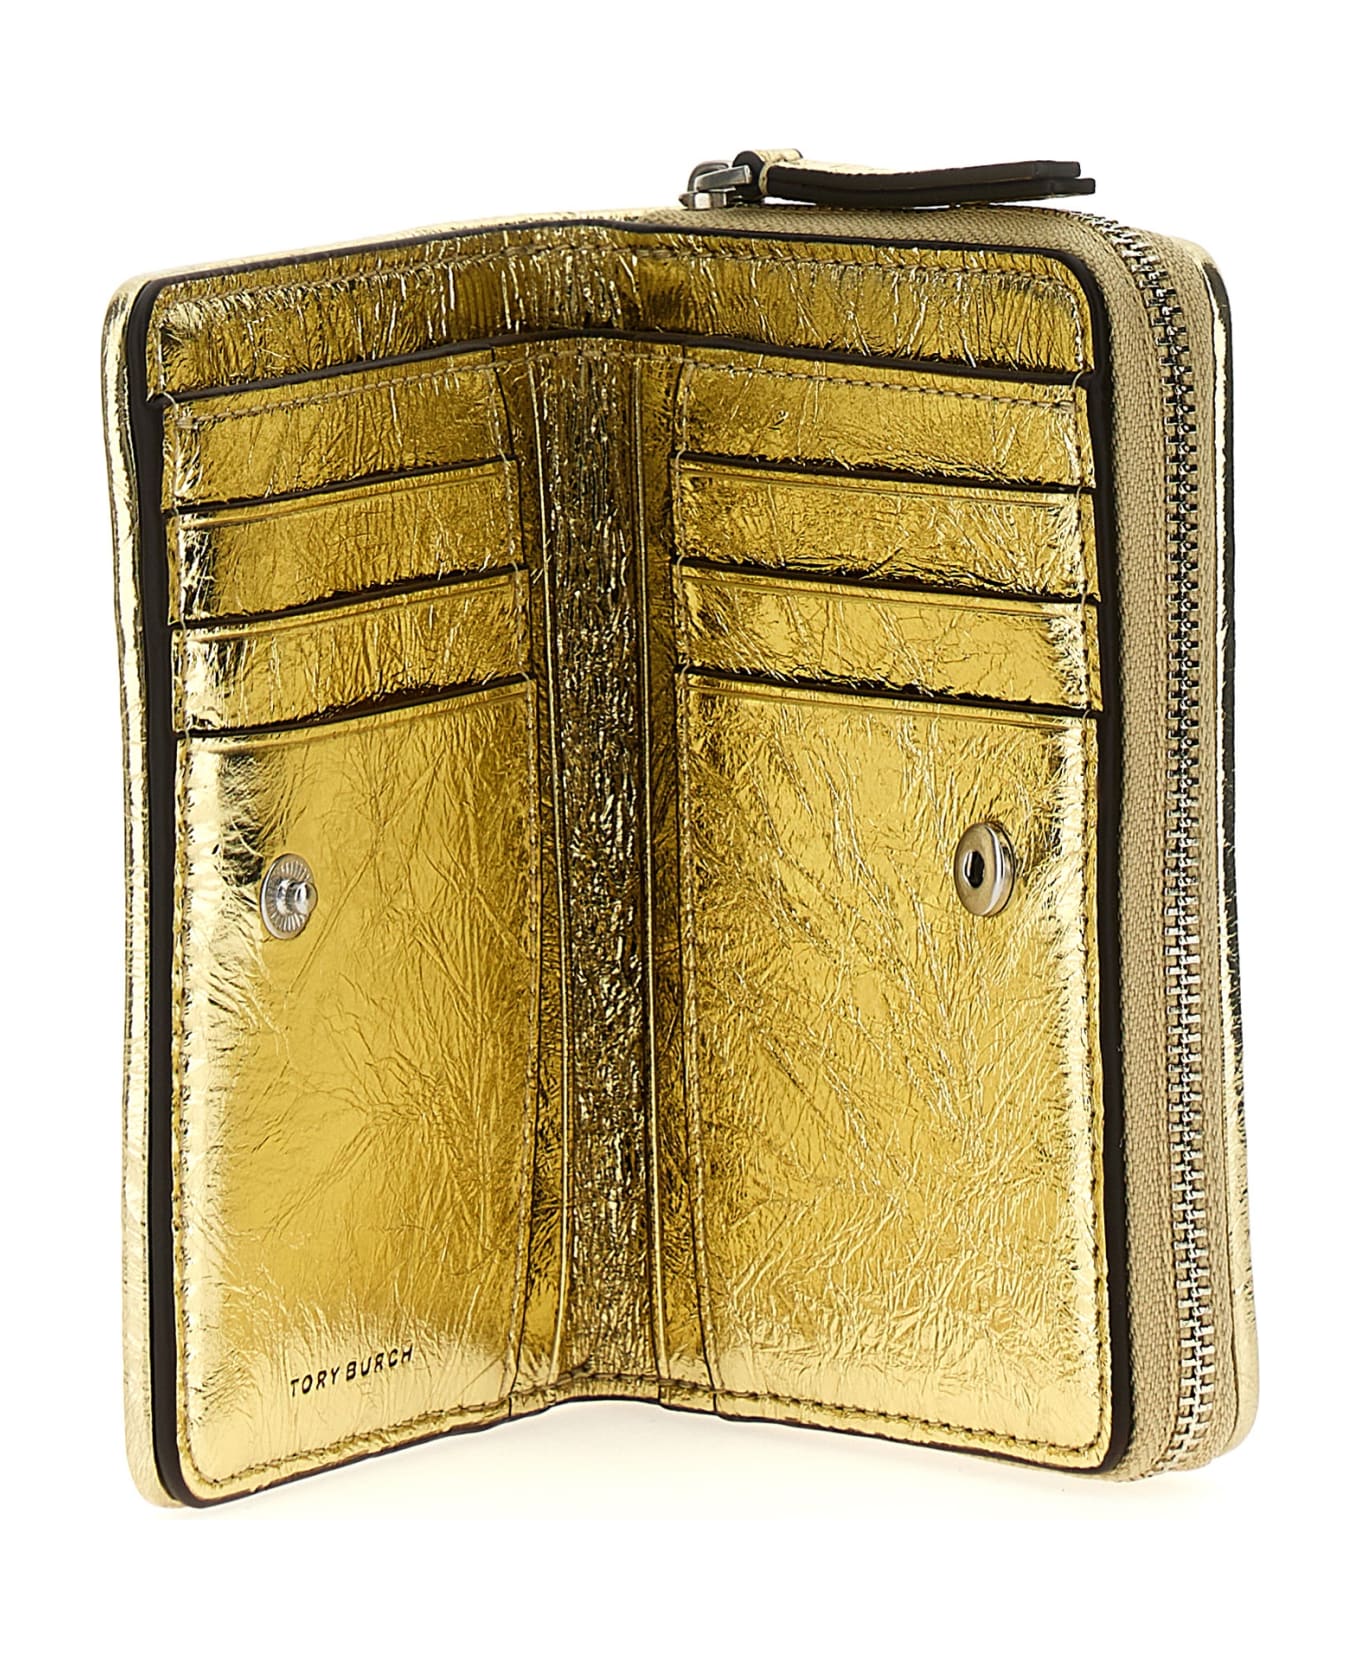 Tory Burch Fleming Soft Metallic Square Quilt Wallet - Gold